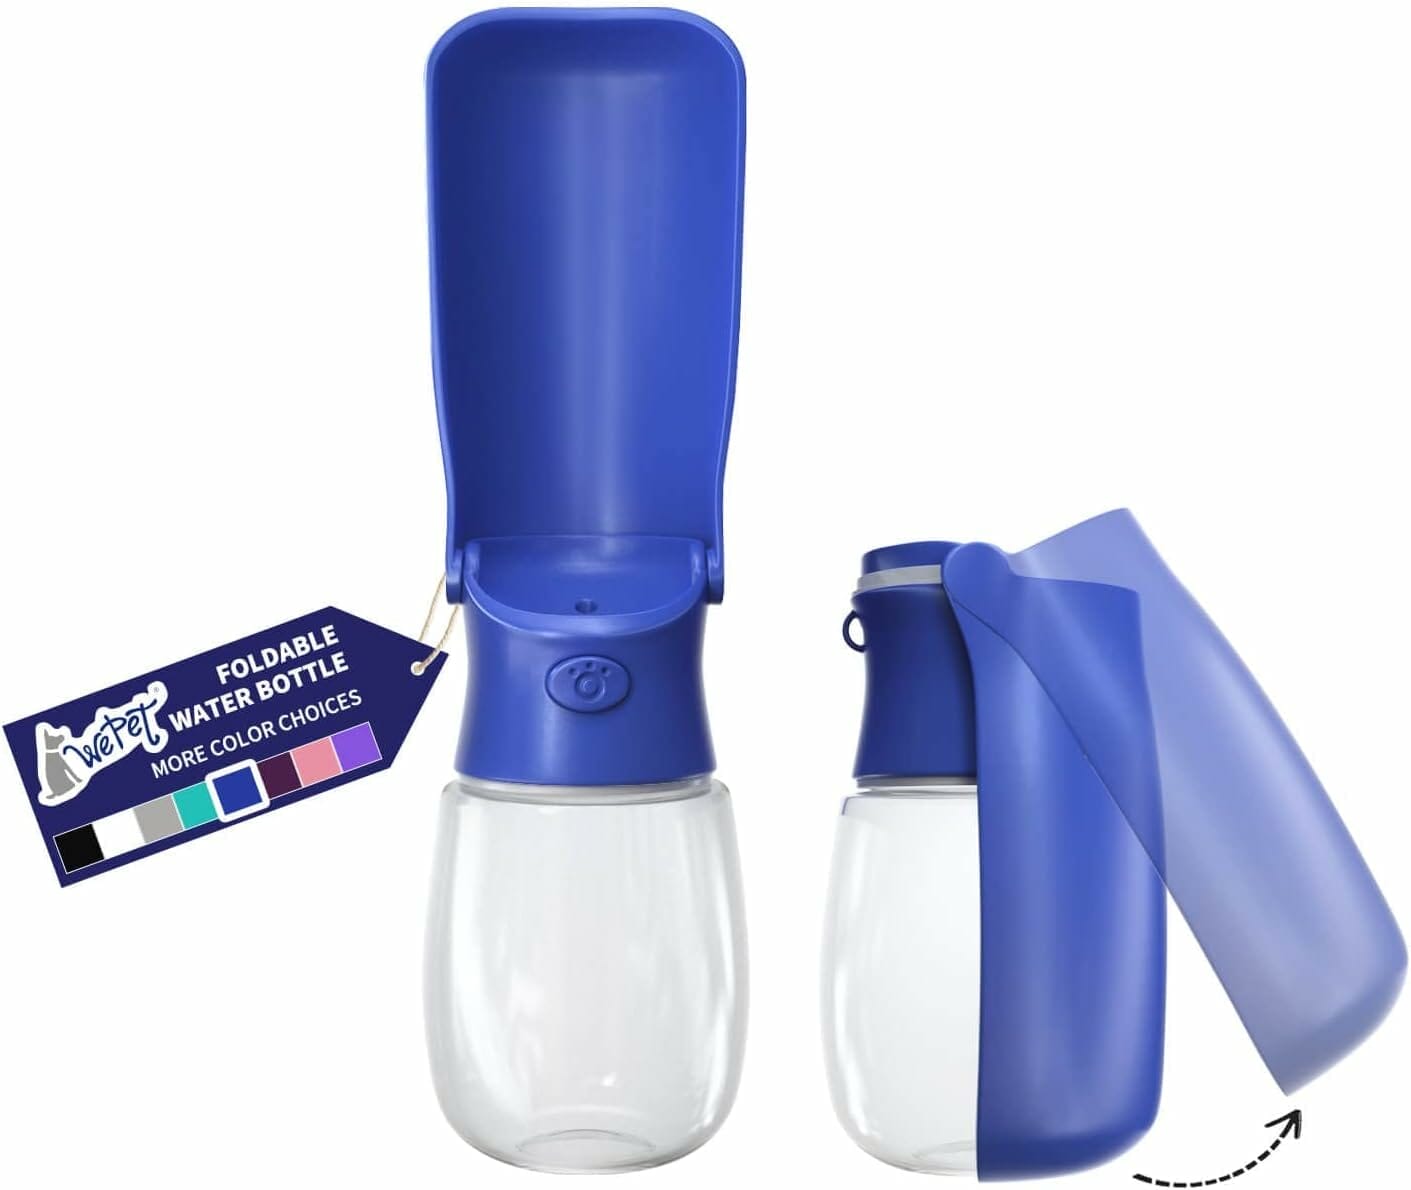 WePet Water Bottle Review